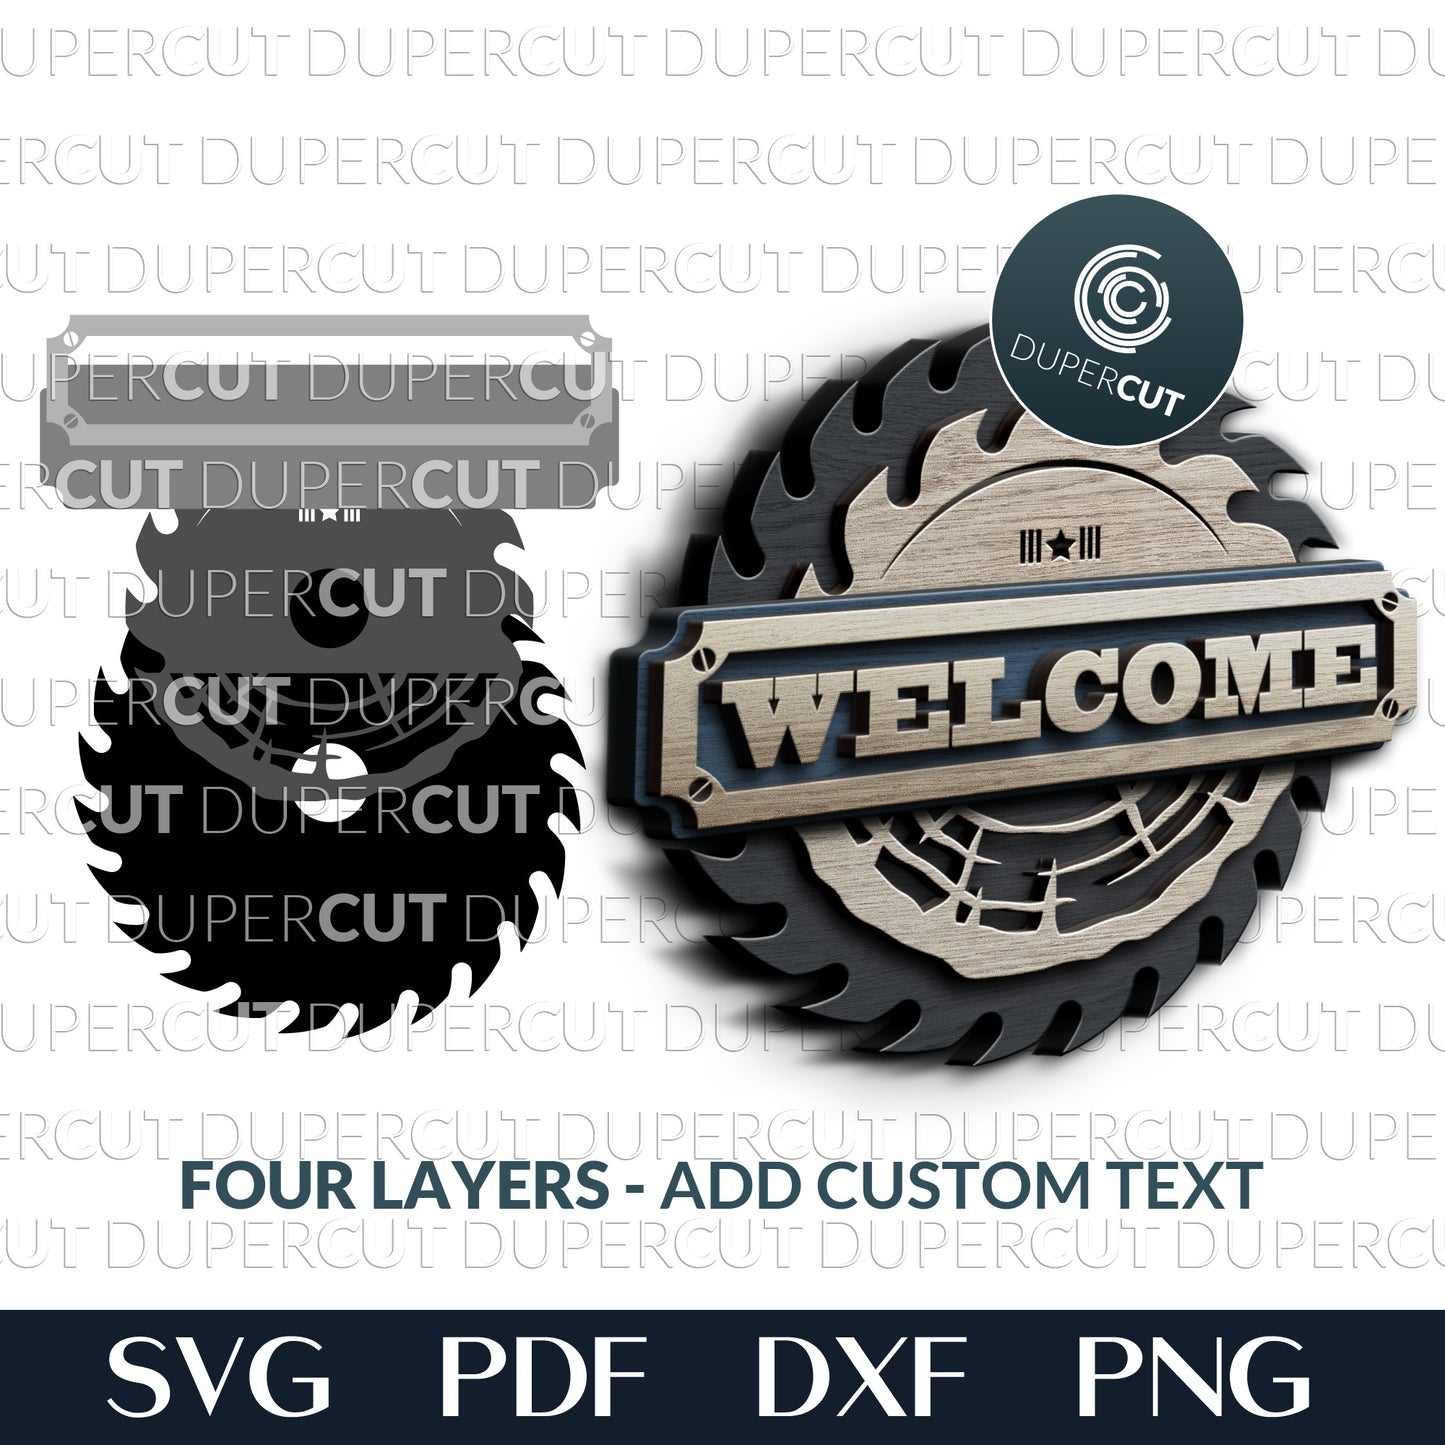 Workshop woodworking Welcome sign, add custom text  - SVG PDF DXF layered cutting files for laser and digital machines, Glowforge, Silhouette Cameo, Cricut, CNC plasma machines